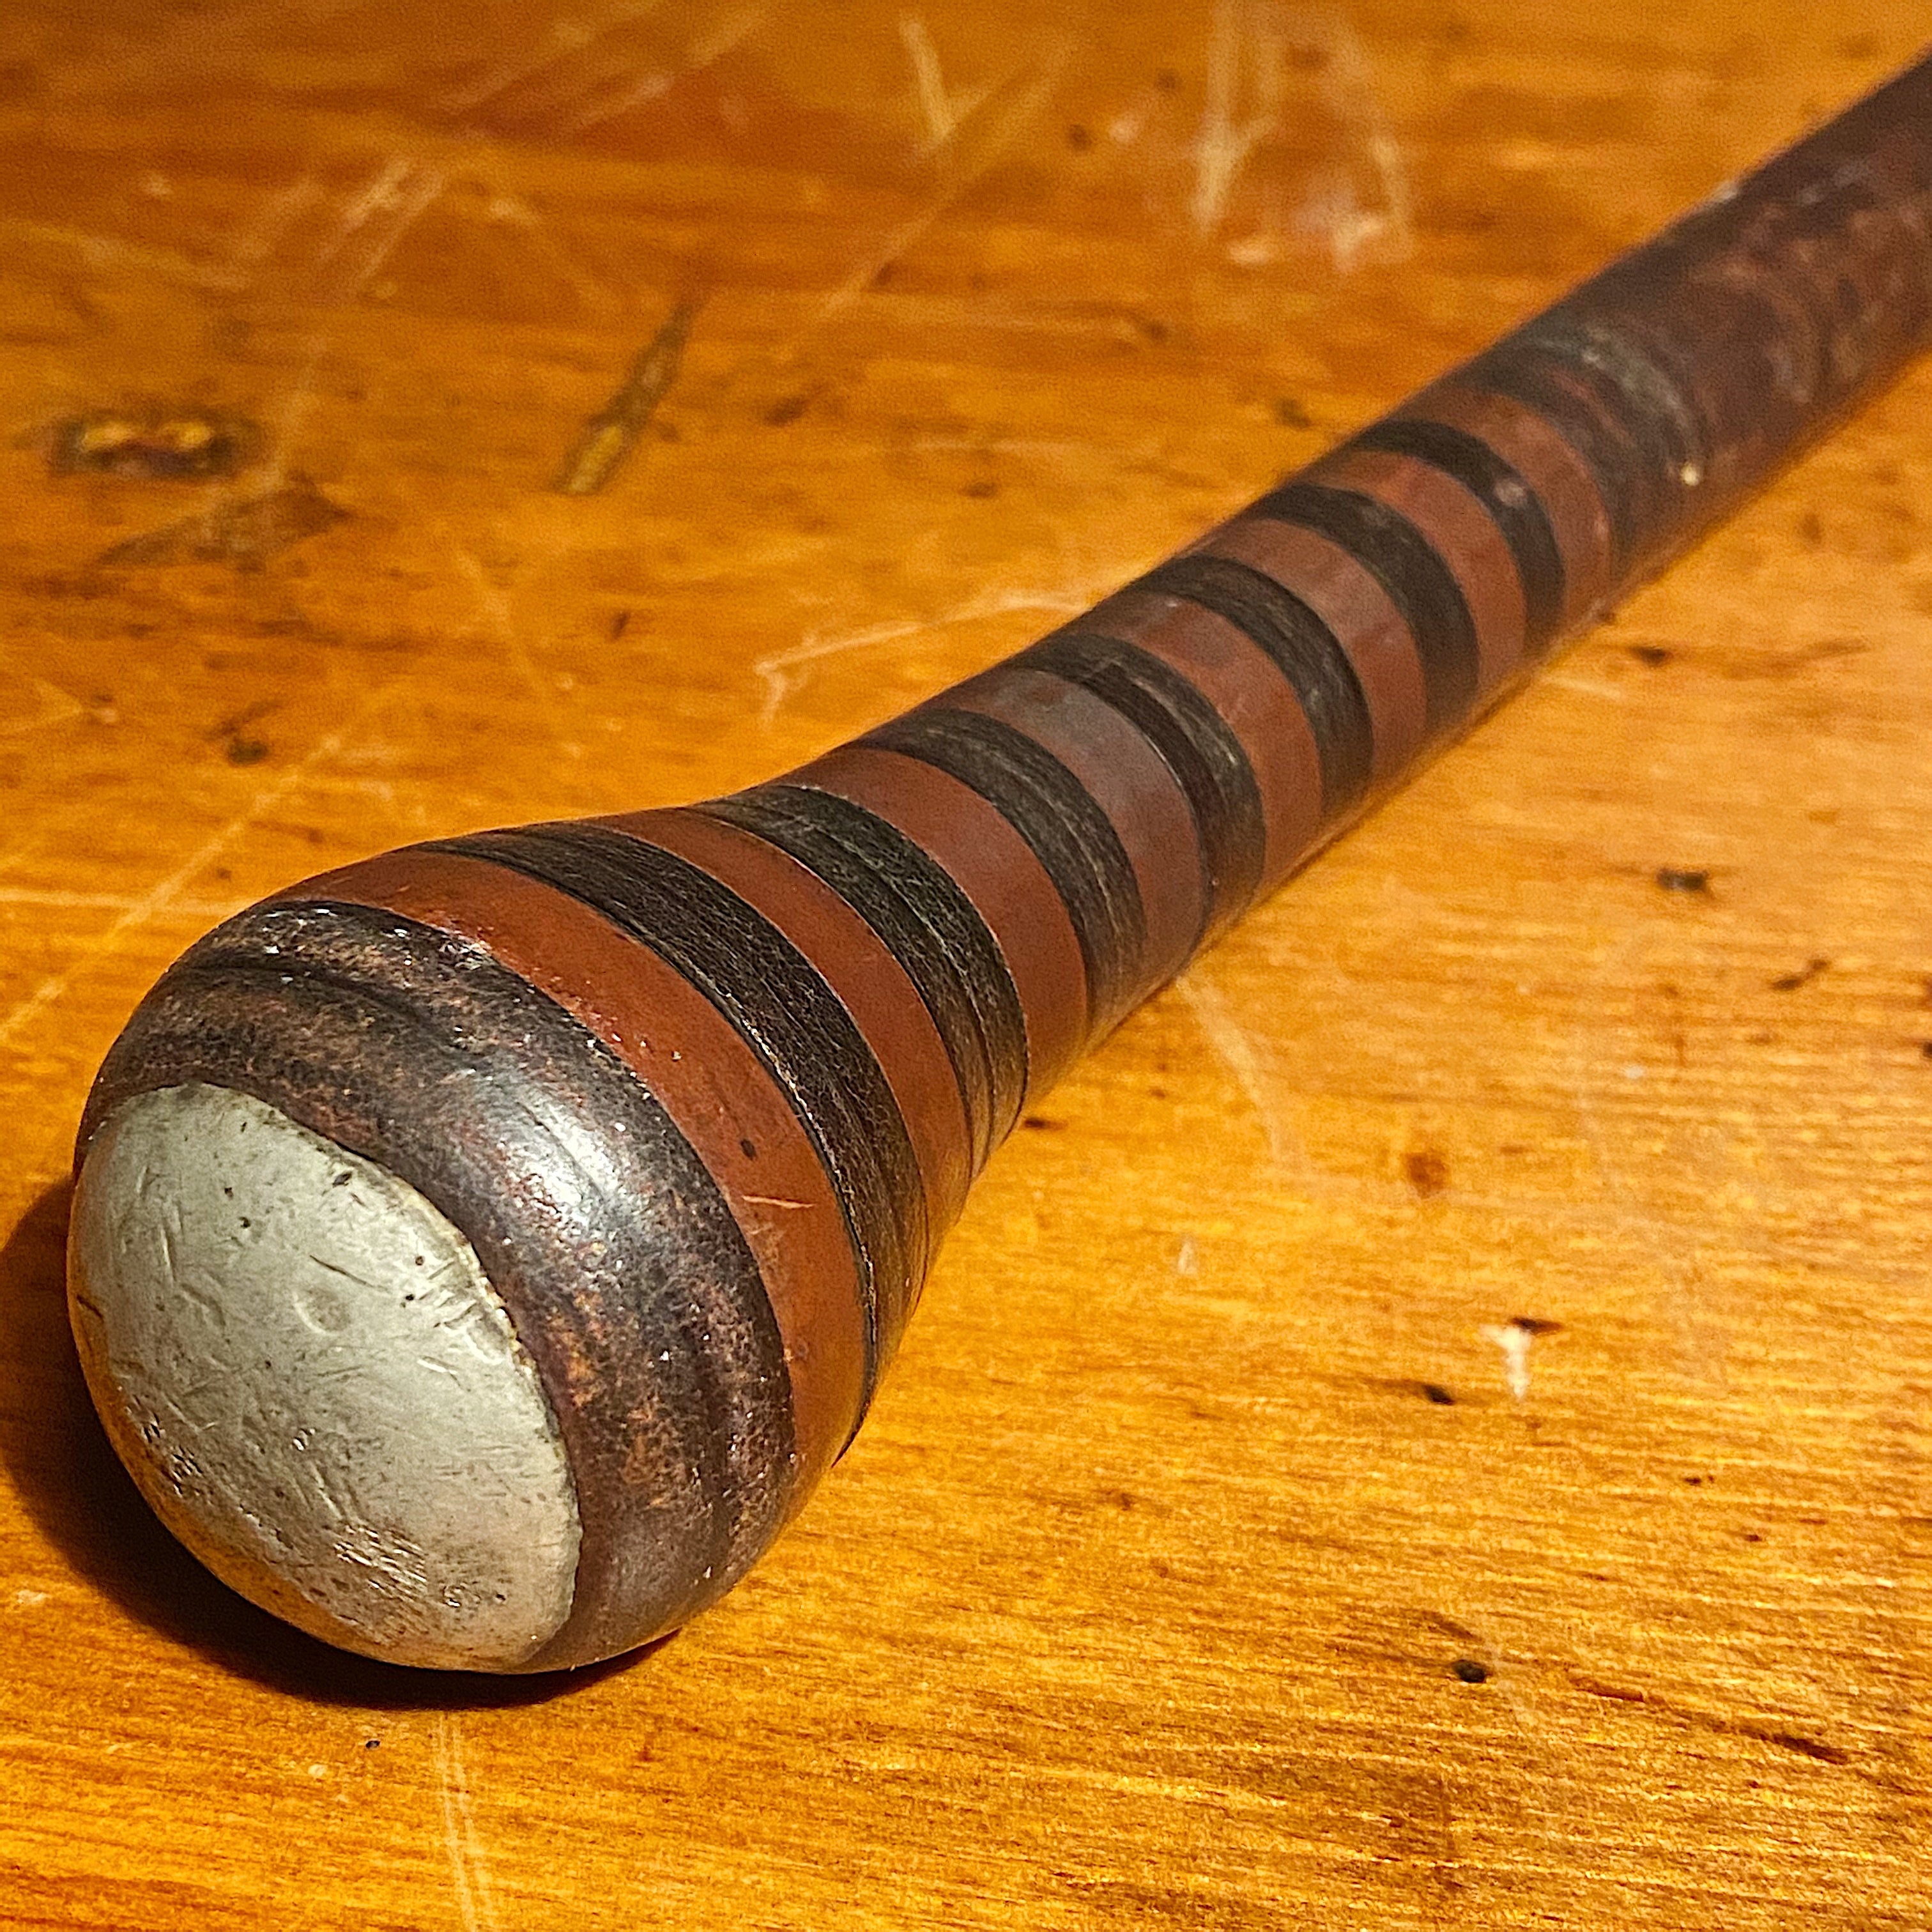 Antique Stacked Leather Cane with Tiger Stripe Handle - 1800s - Rare 19th Century Walking Stick - Weapon Artifact - Unusual Folk Art 